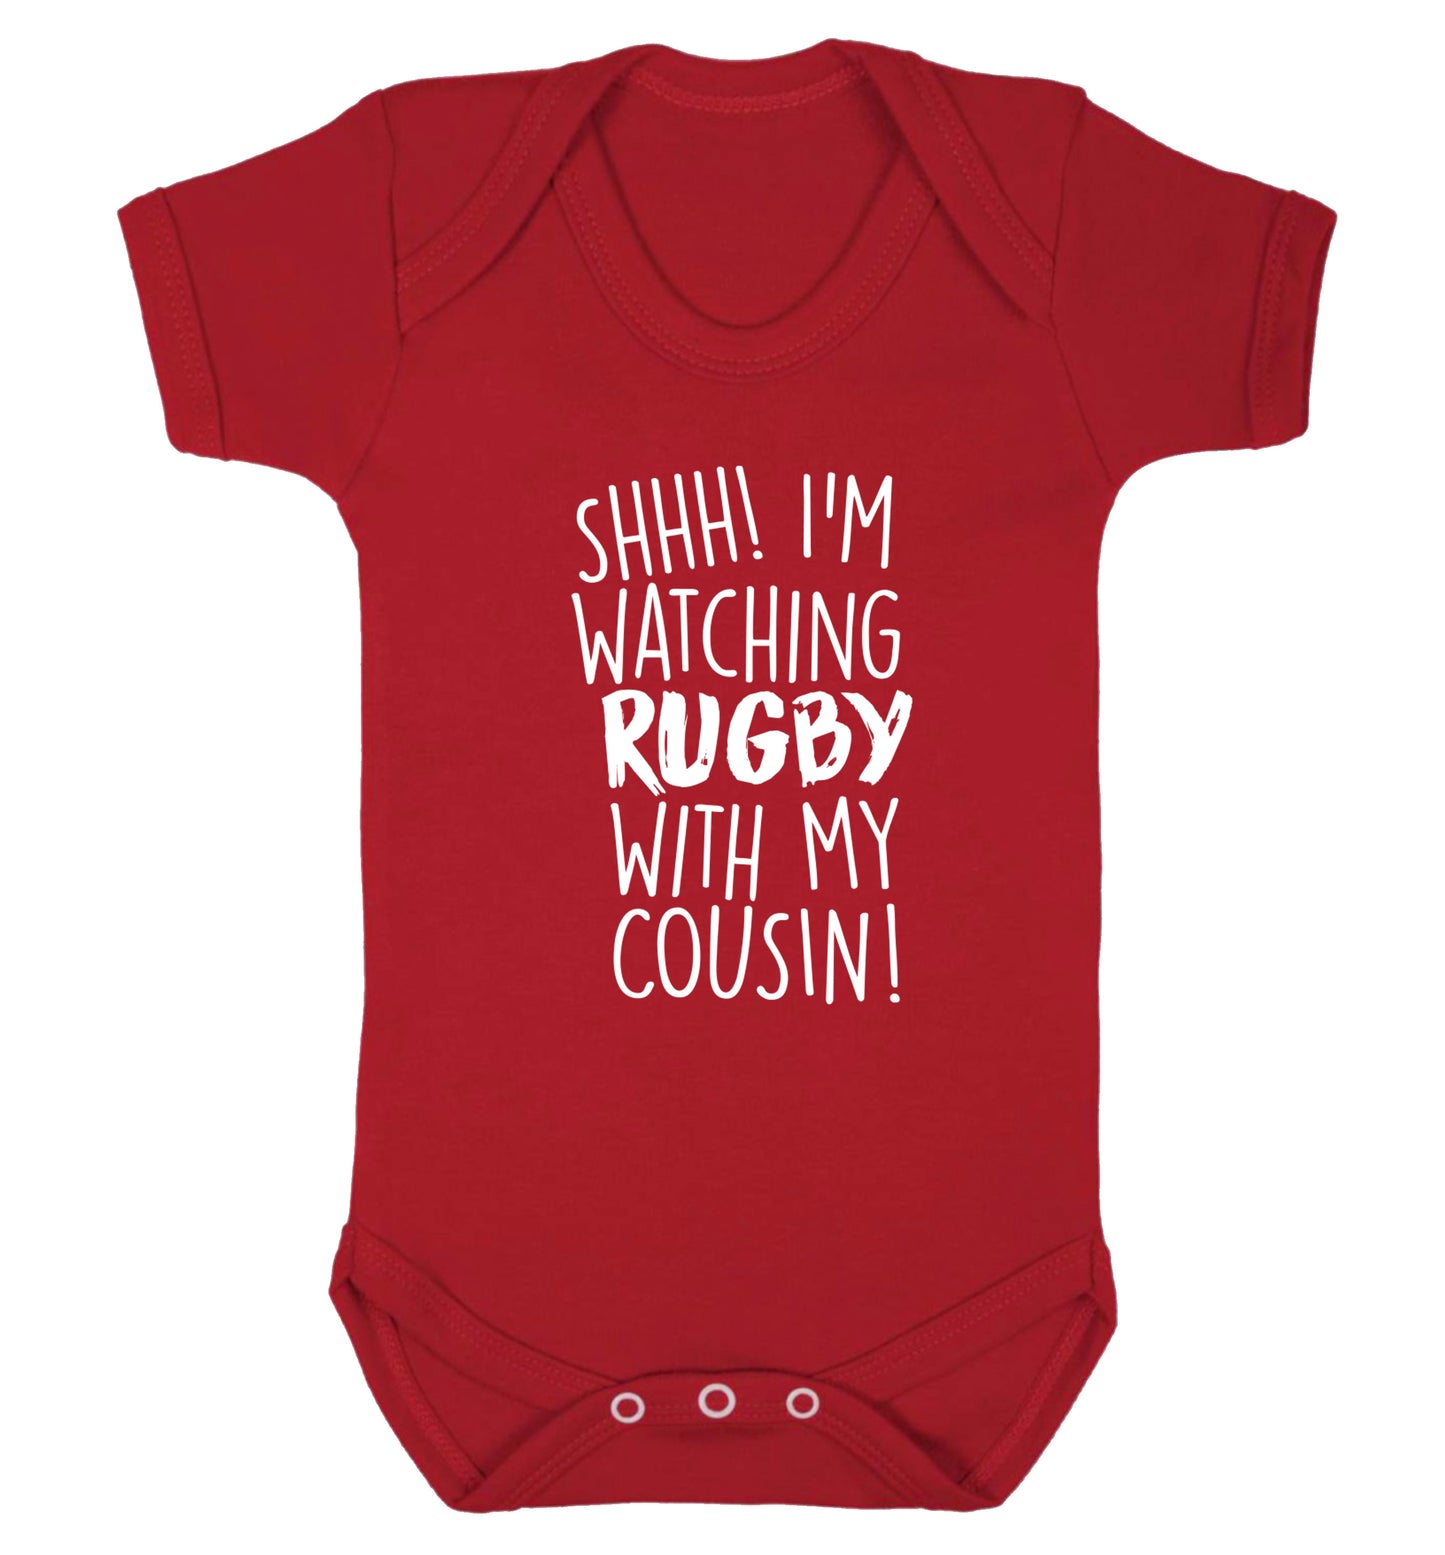 Shhh I'm watching rugby with my cousin Baby Vest red 18-24 months